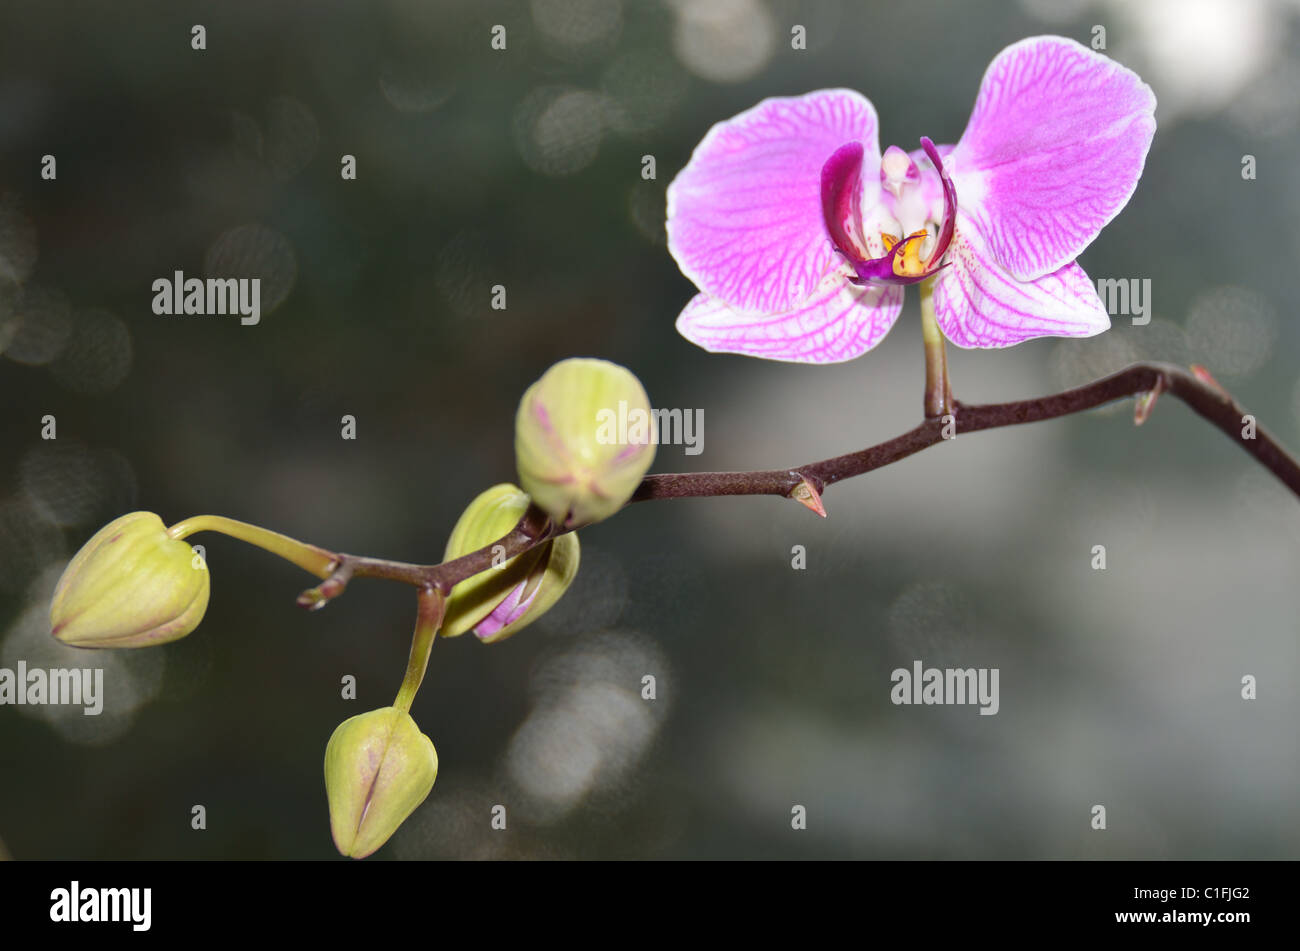 Orchid flower and buds Stock Photo